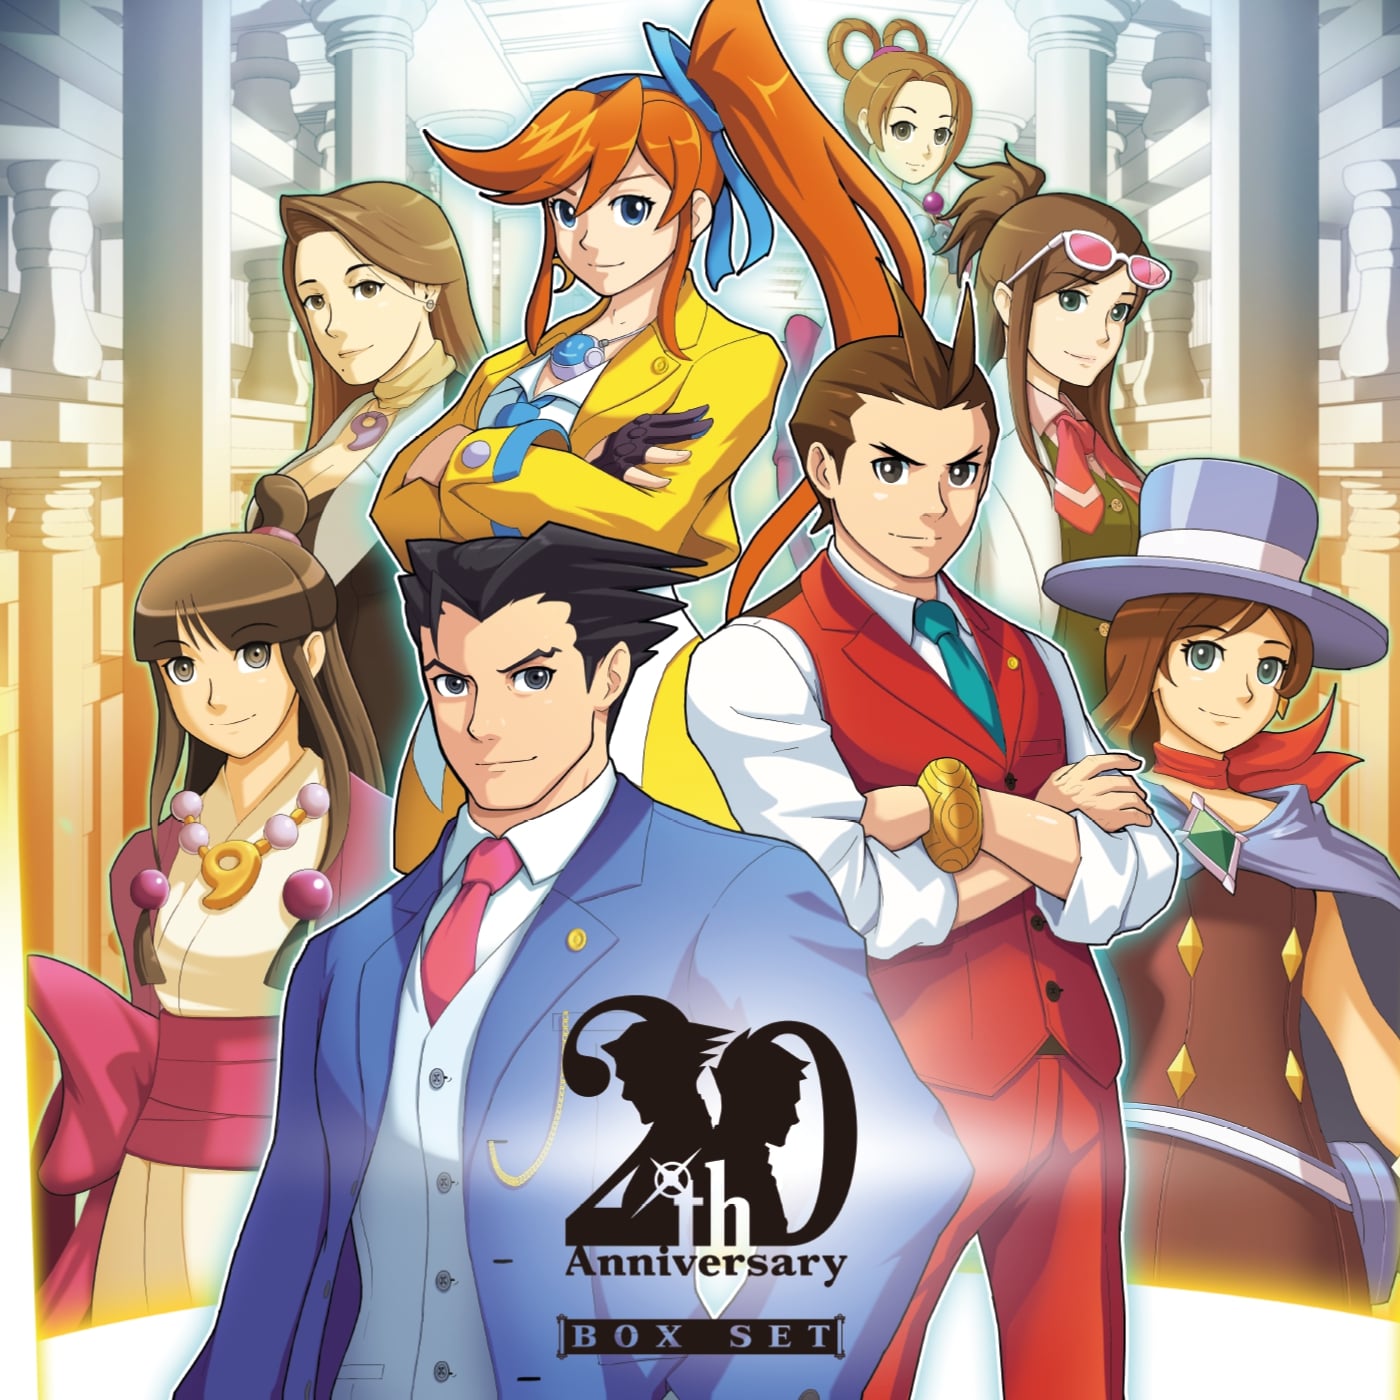 Ace Attorney series